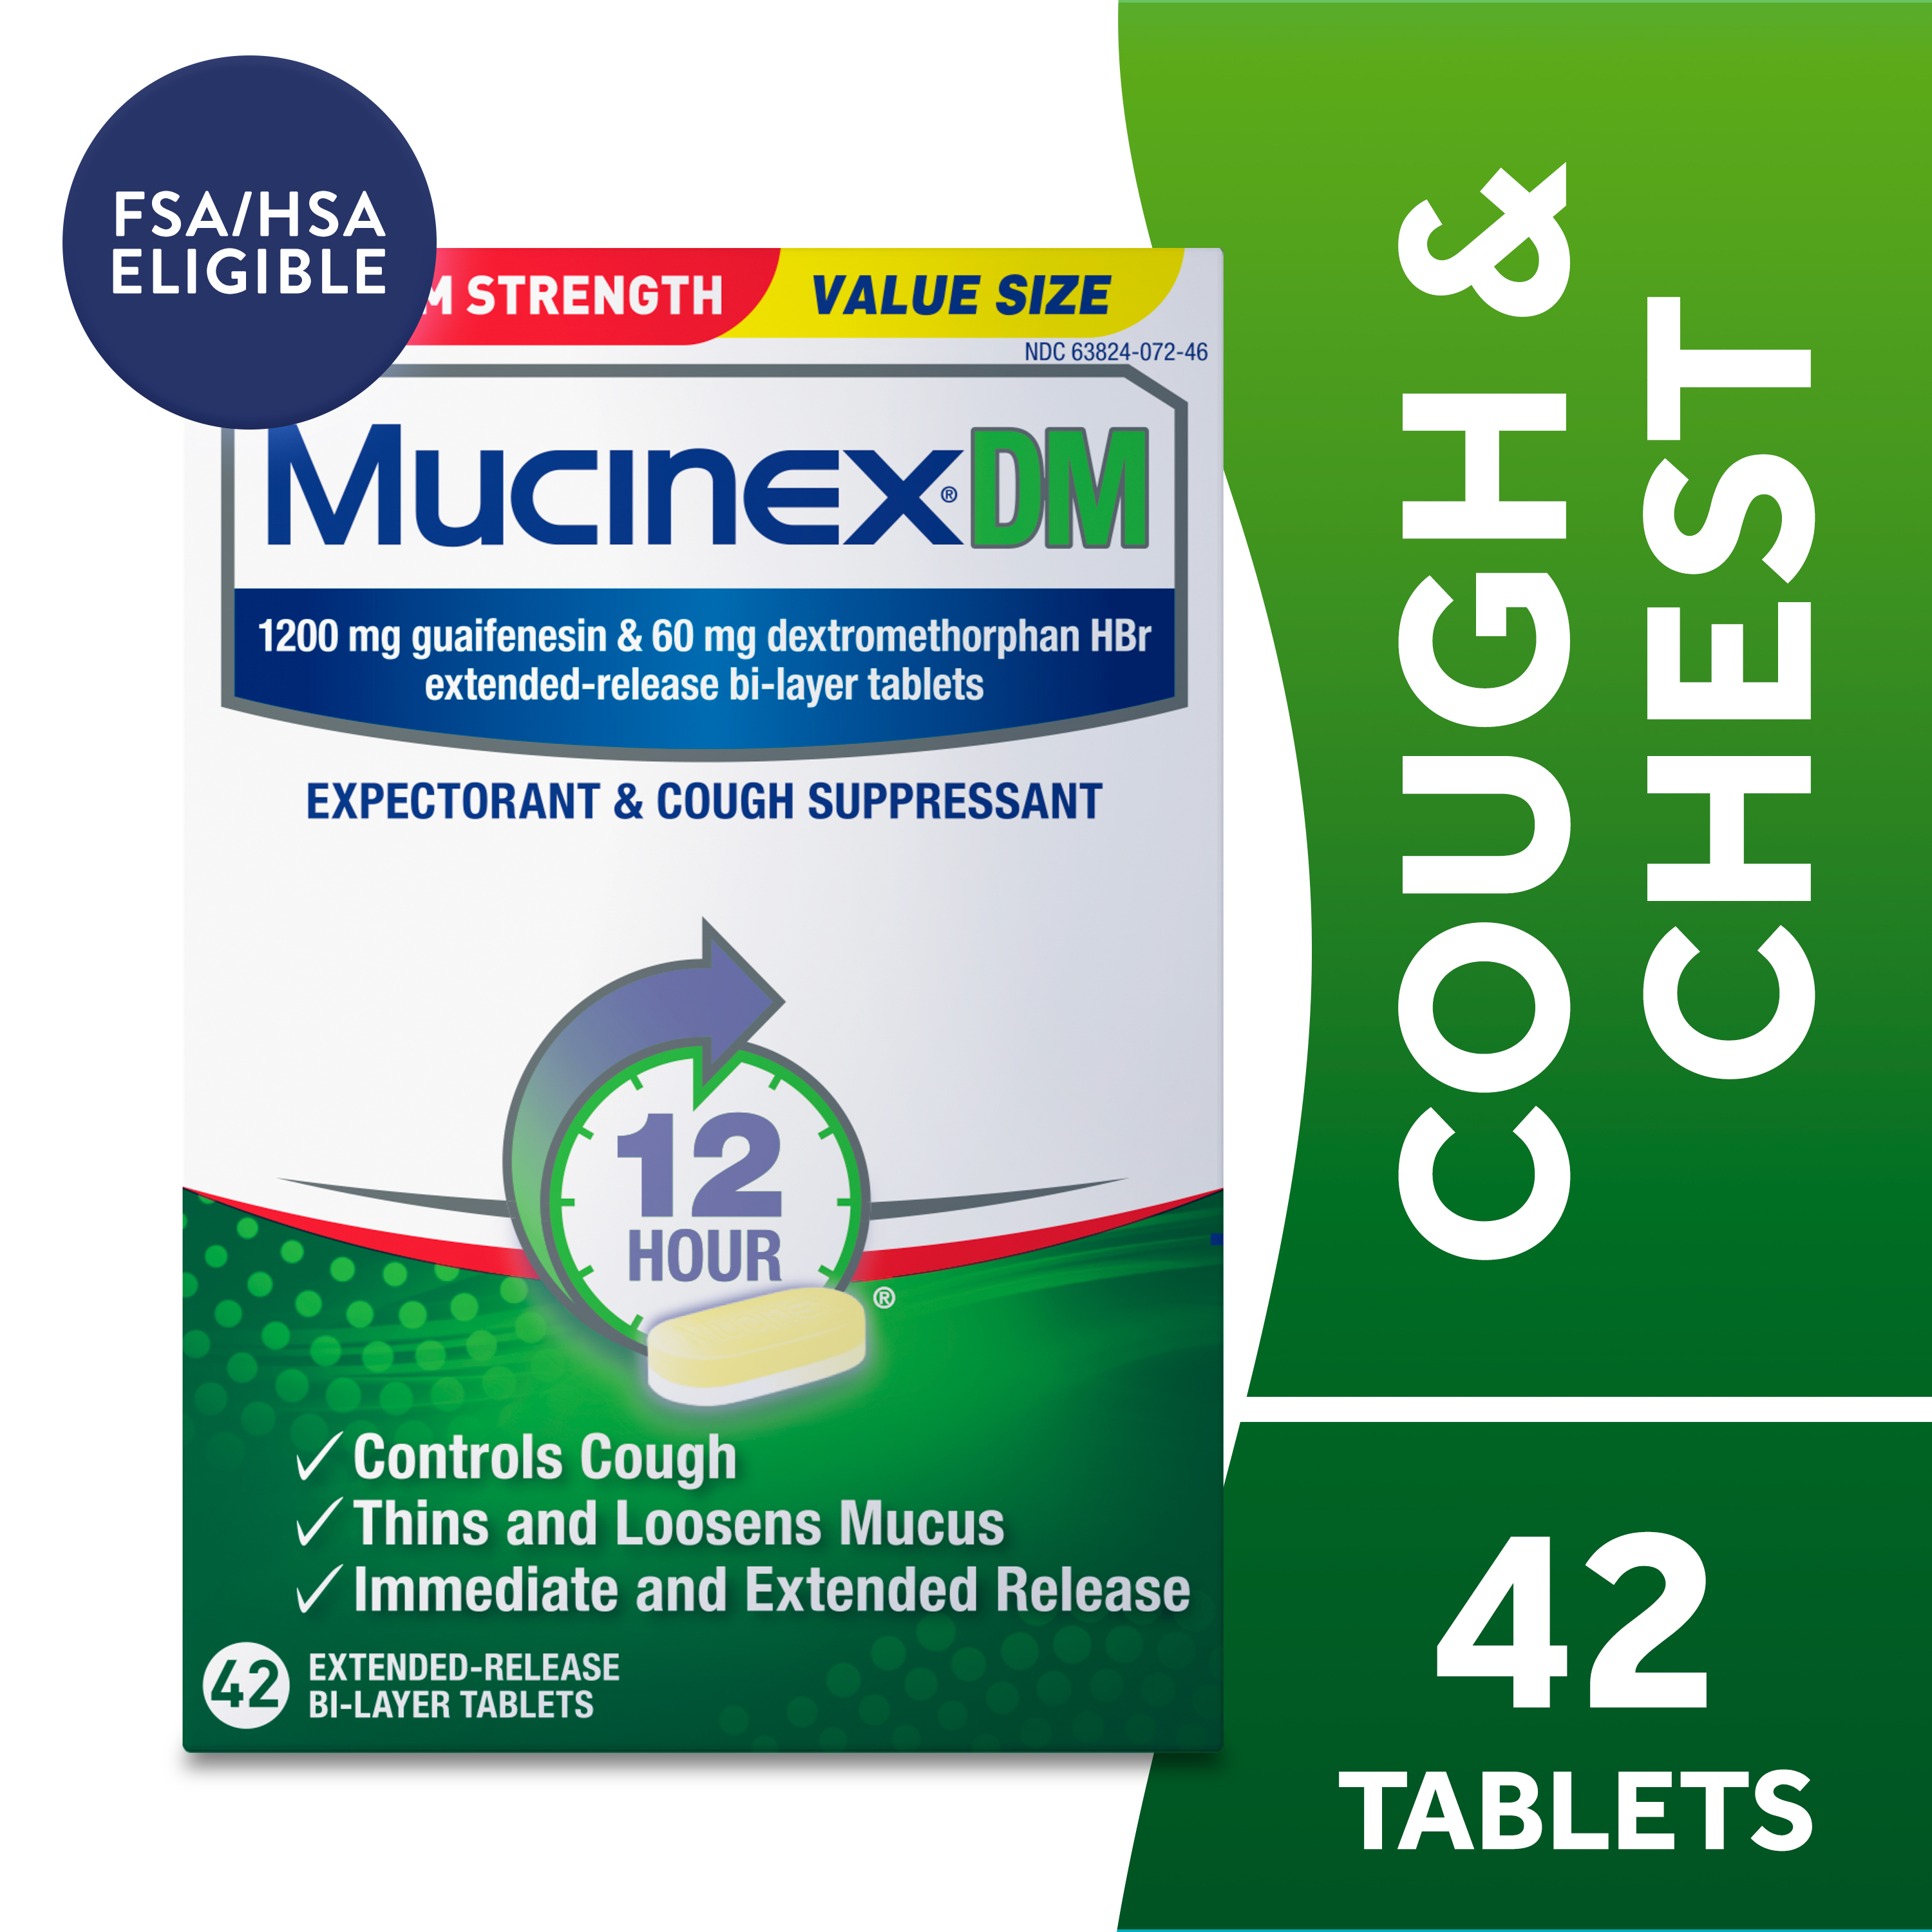 Mucinex Dm 12 Hr Maximum Strength Chest Congestion Expectorant And Cough Suppressant Tablets